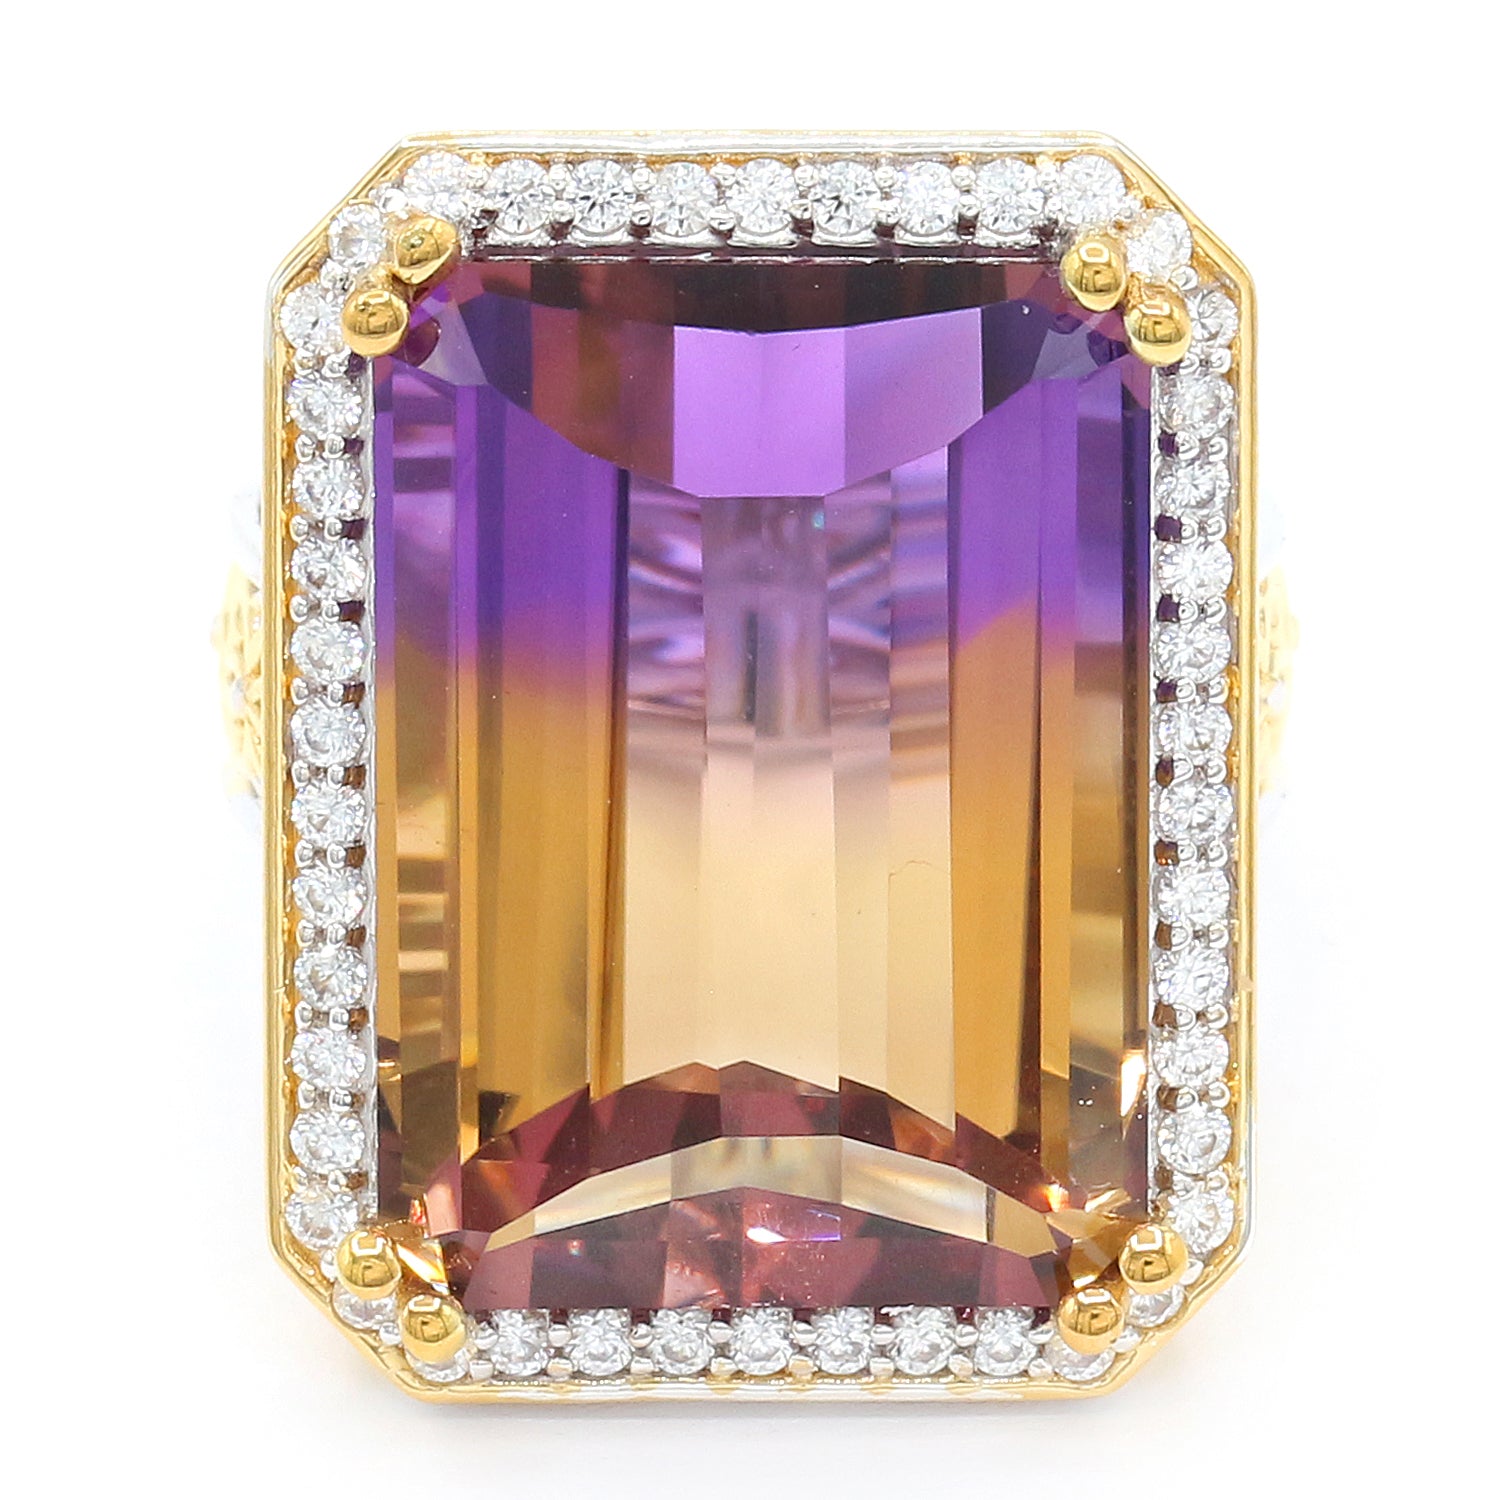 Limited Edition Gems en Vogue Luxe, One-of-a-Kind 30.69ctw Ametrine & White Zircon Halo Honker Ring